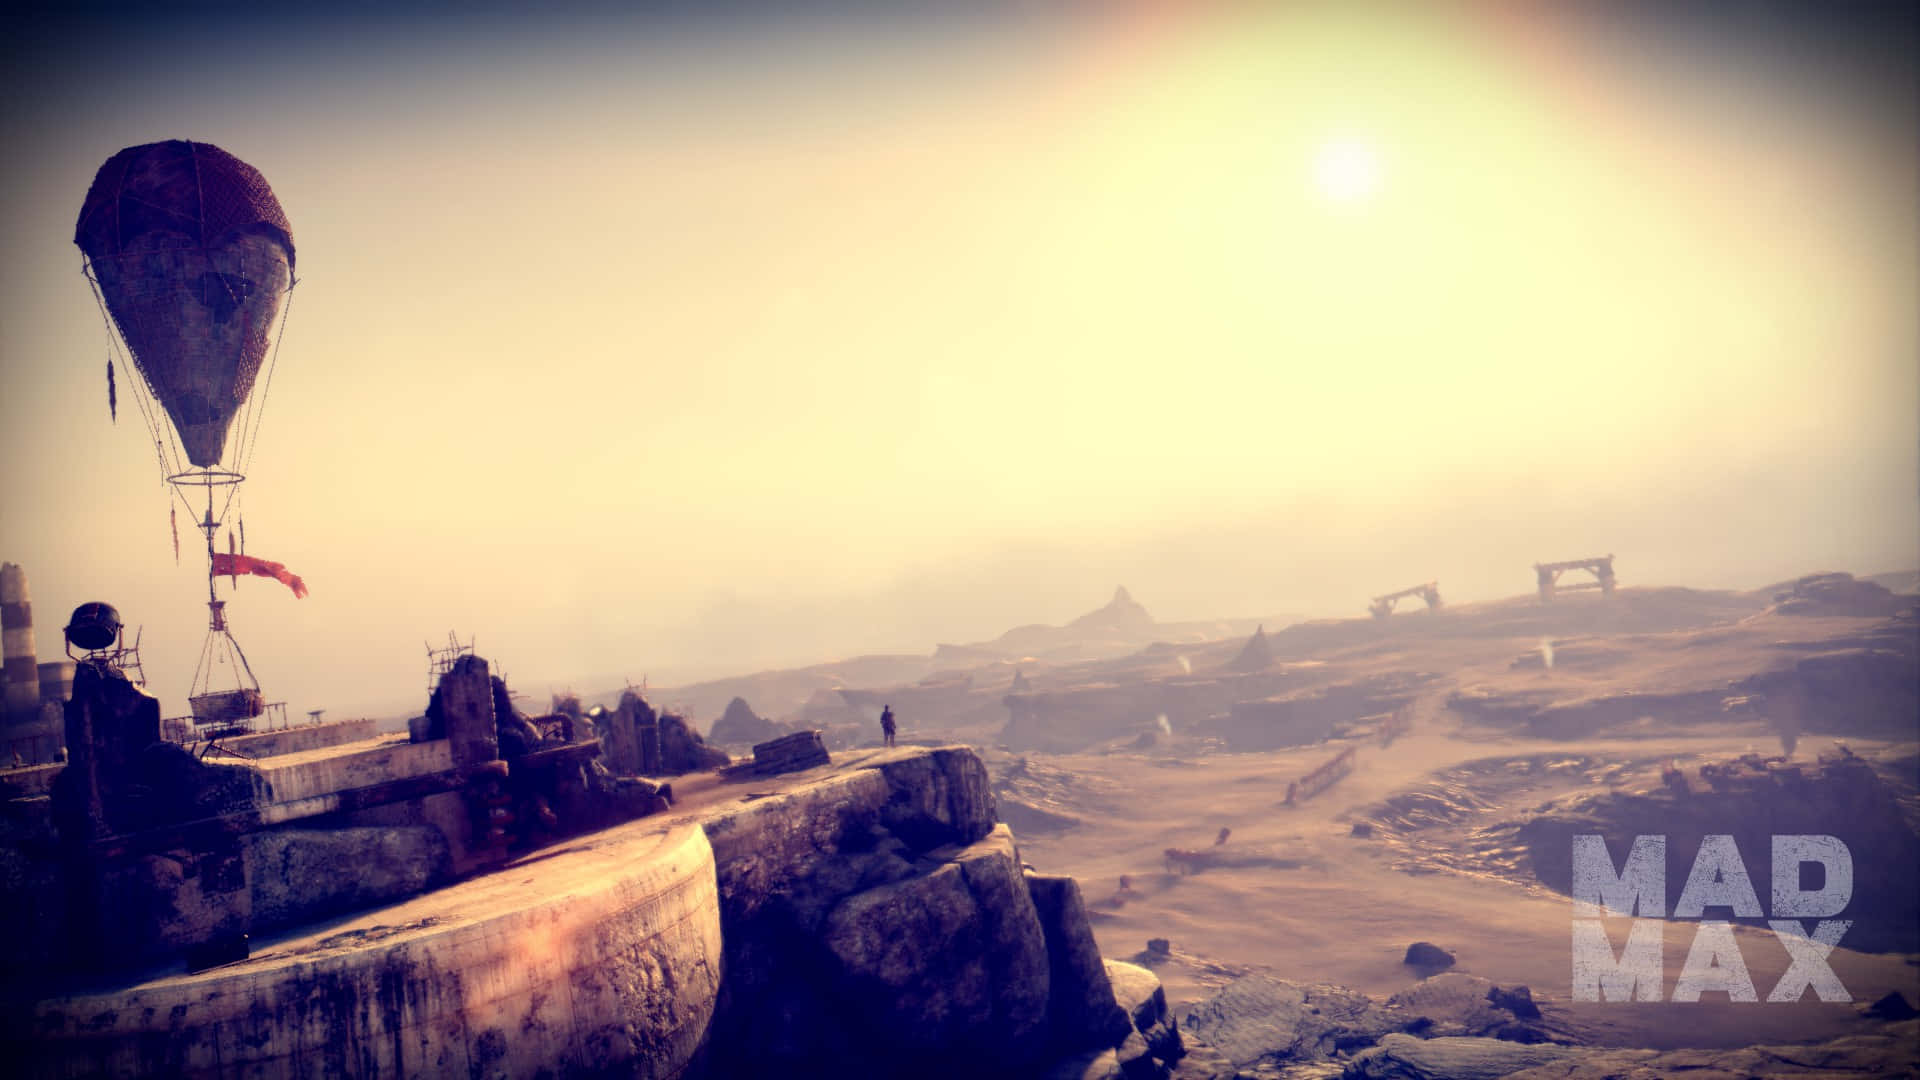 Mad Max Balloon Outpost Overlook Wallpaper